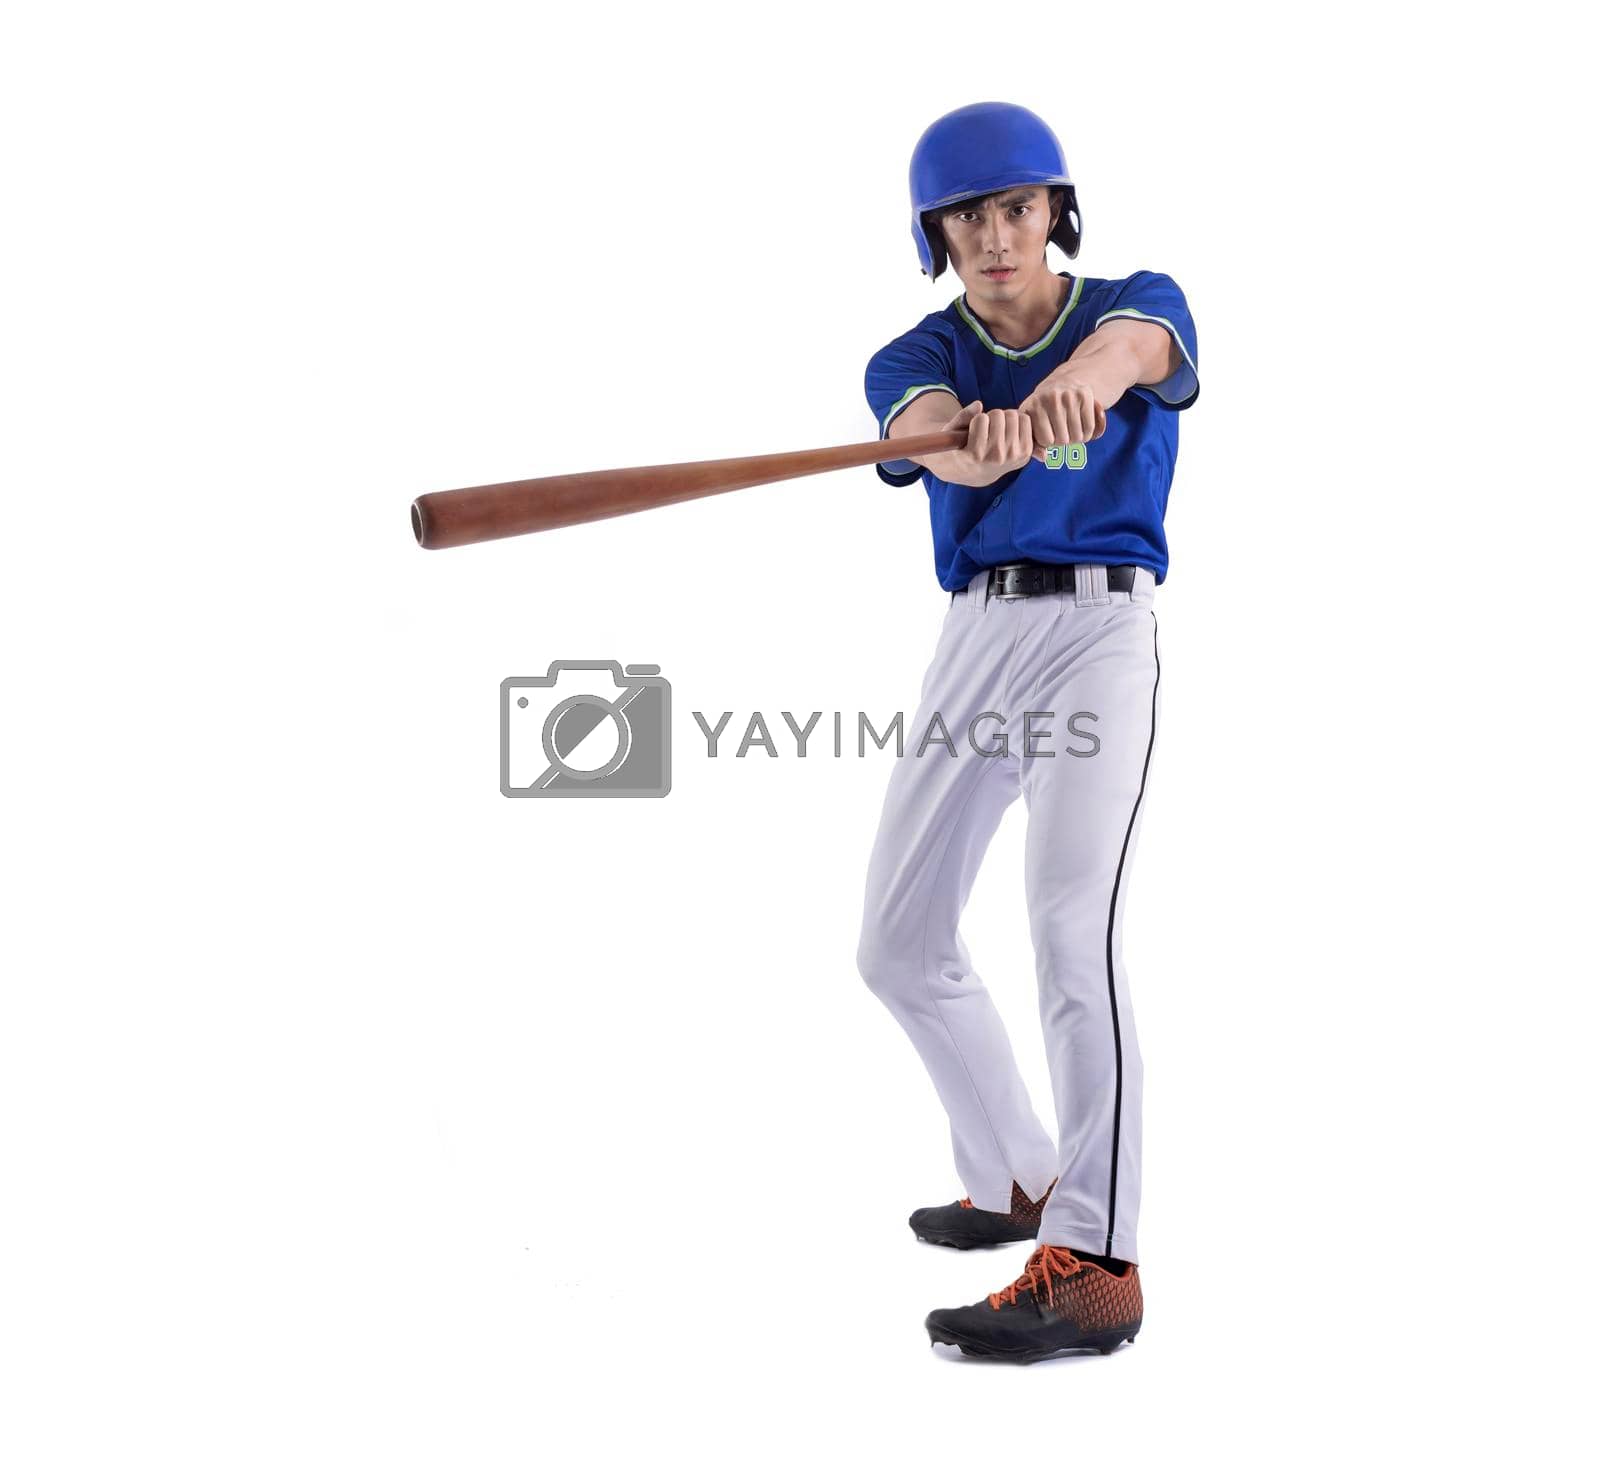 Royalty free image of Baseball player in action and isolated on white by tomwang